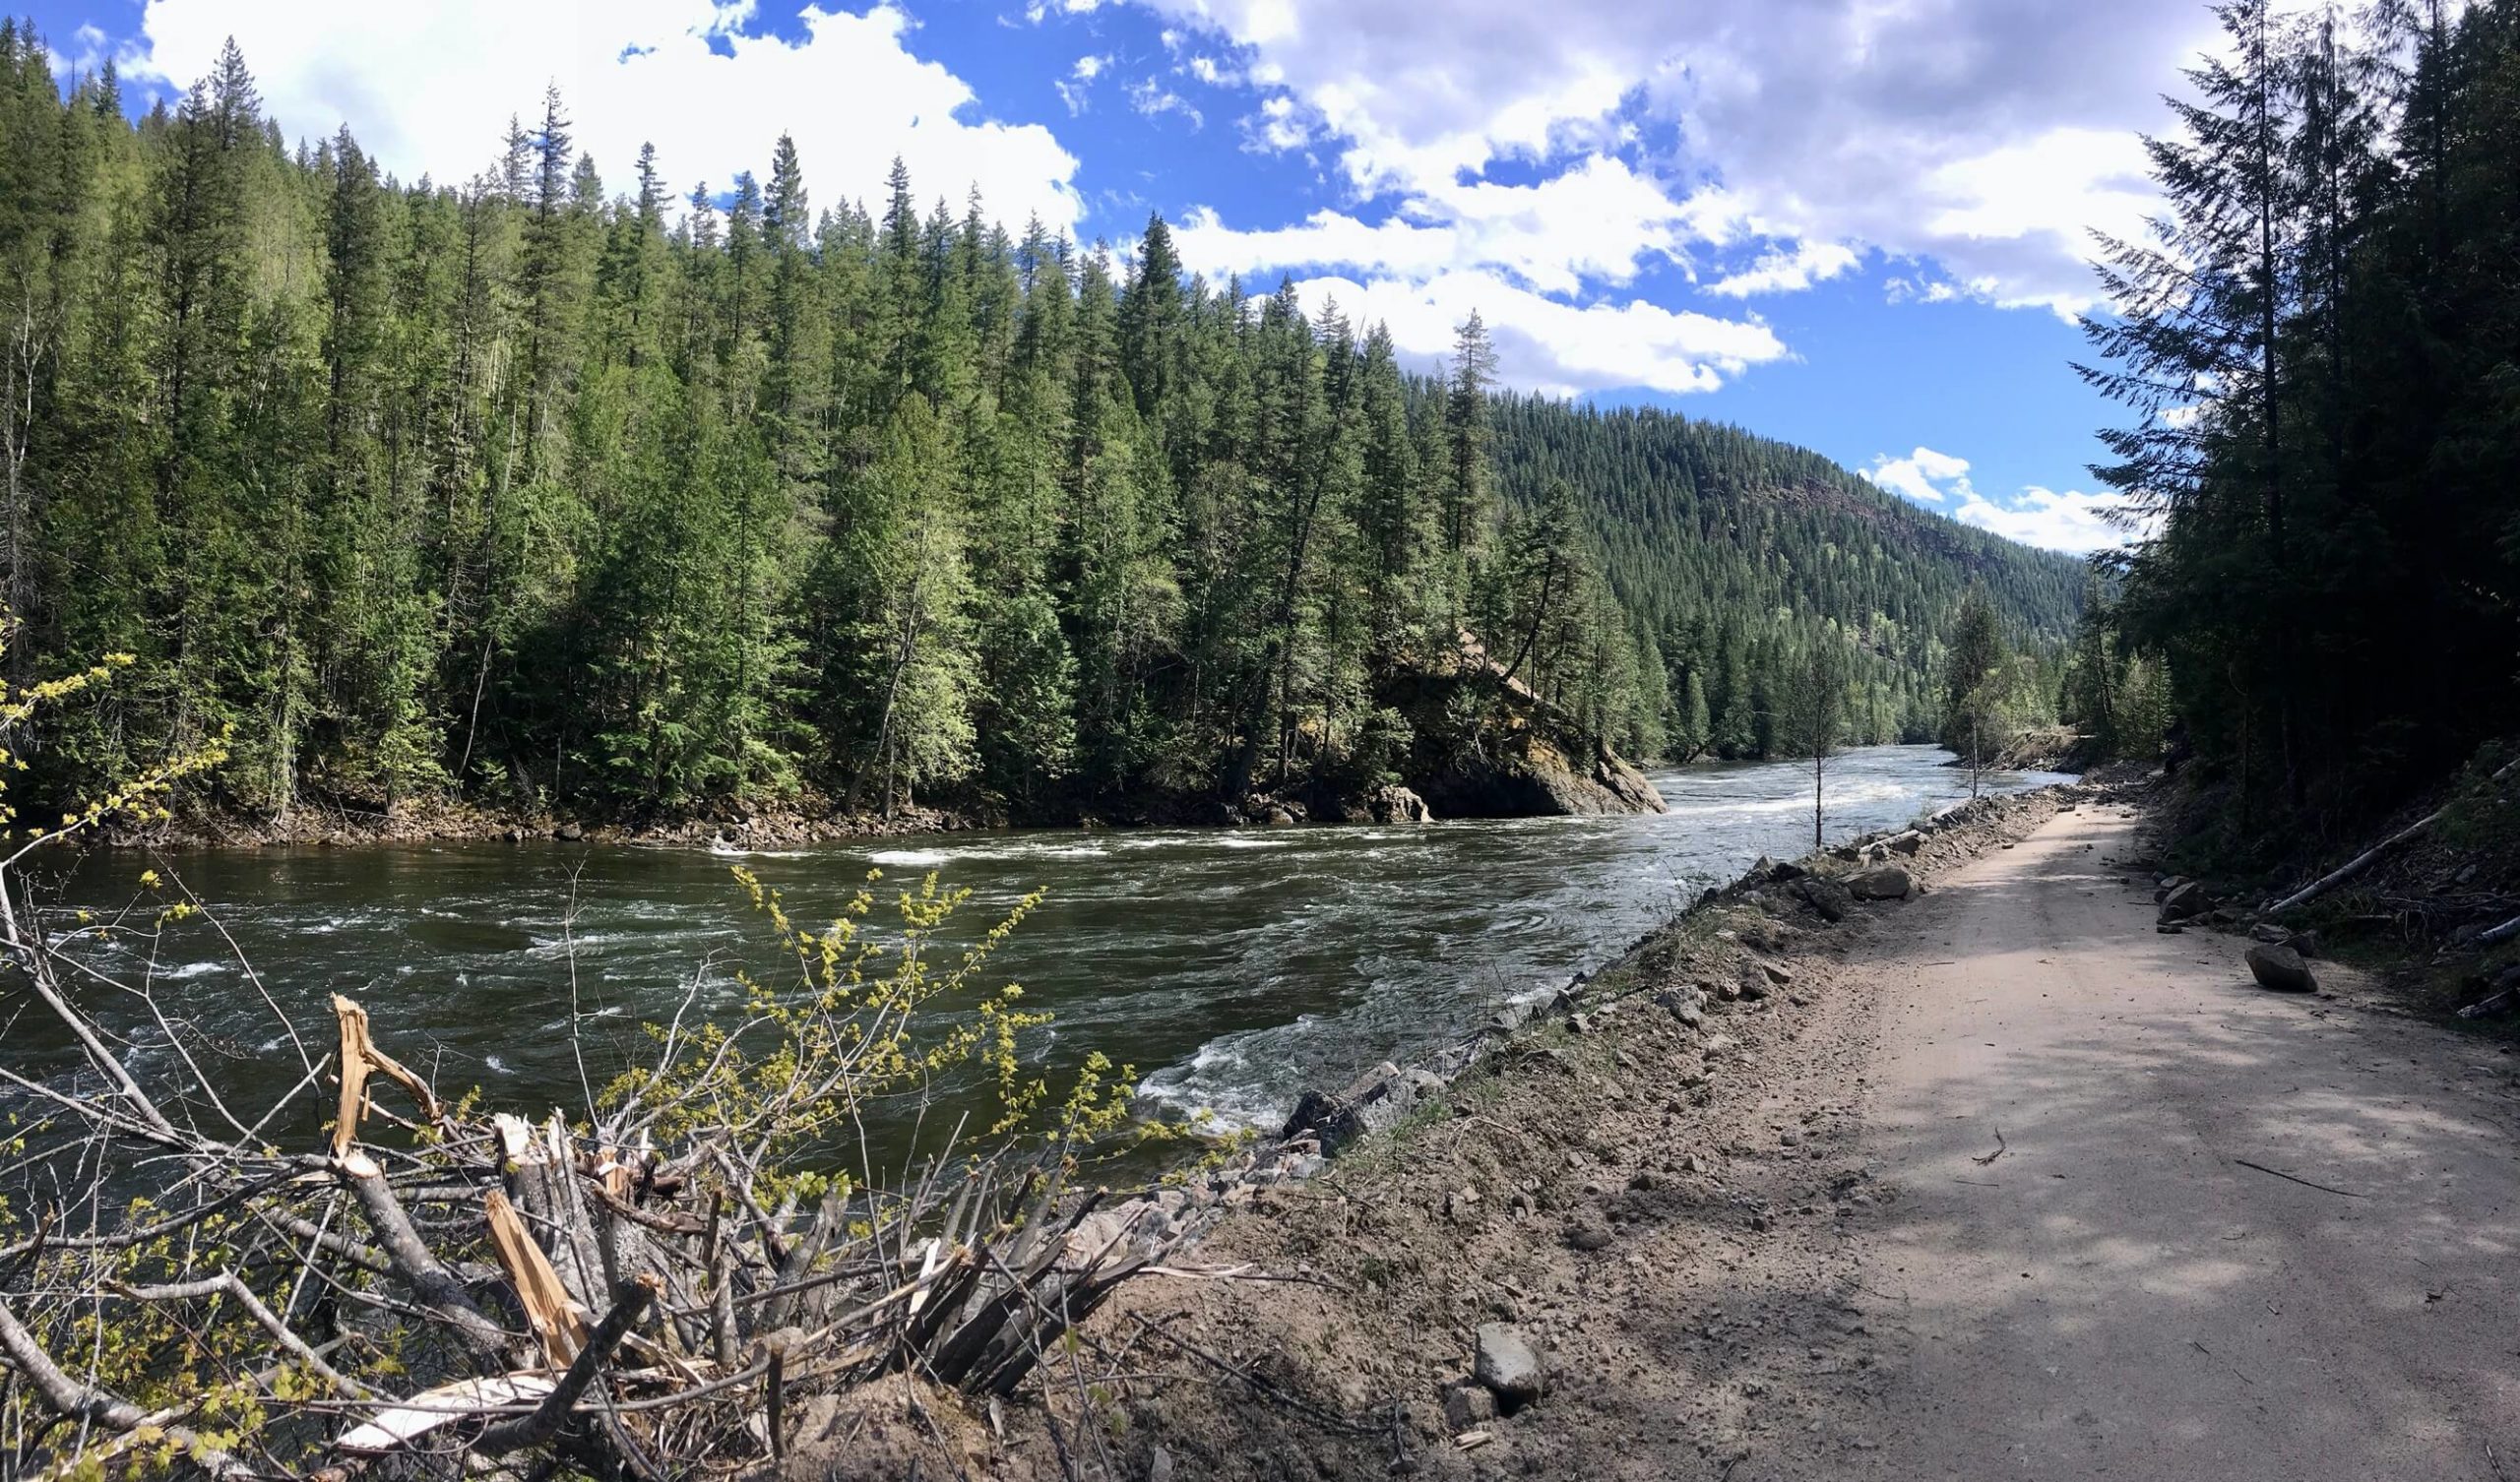 Hiking along the Clearwater River